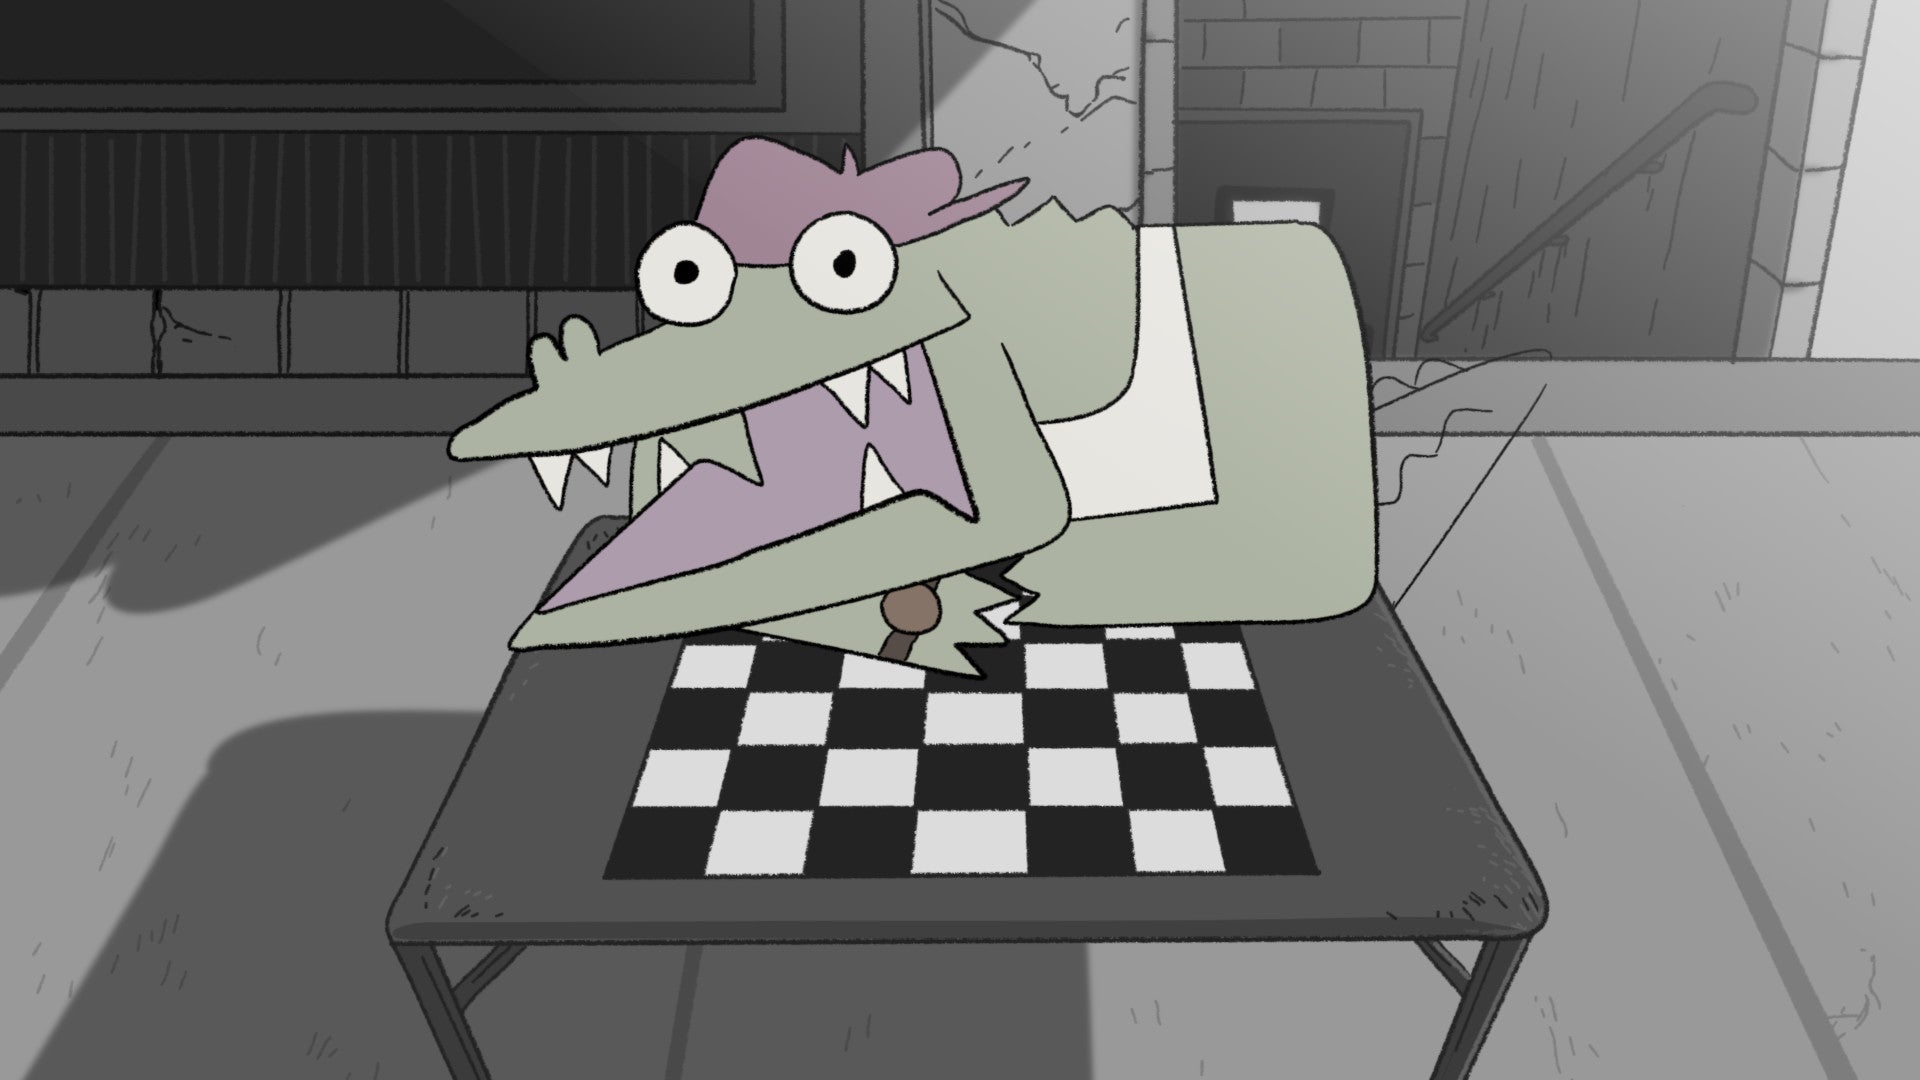 A Later Alligator screenshot of a cartoon alligator with a big goofy grin sitting at a checkers board